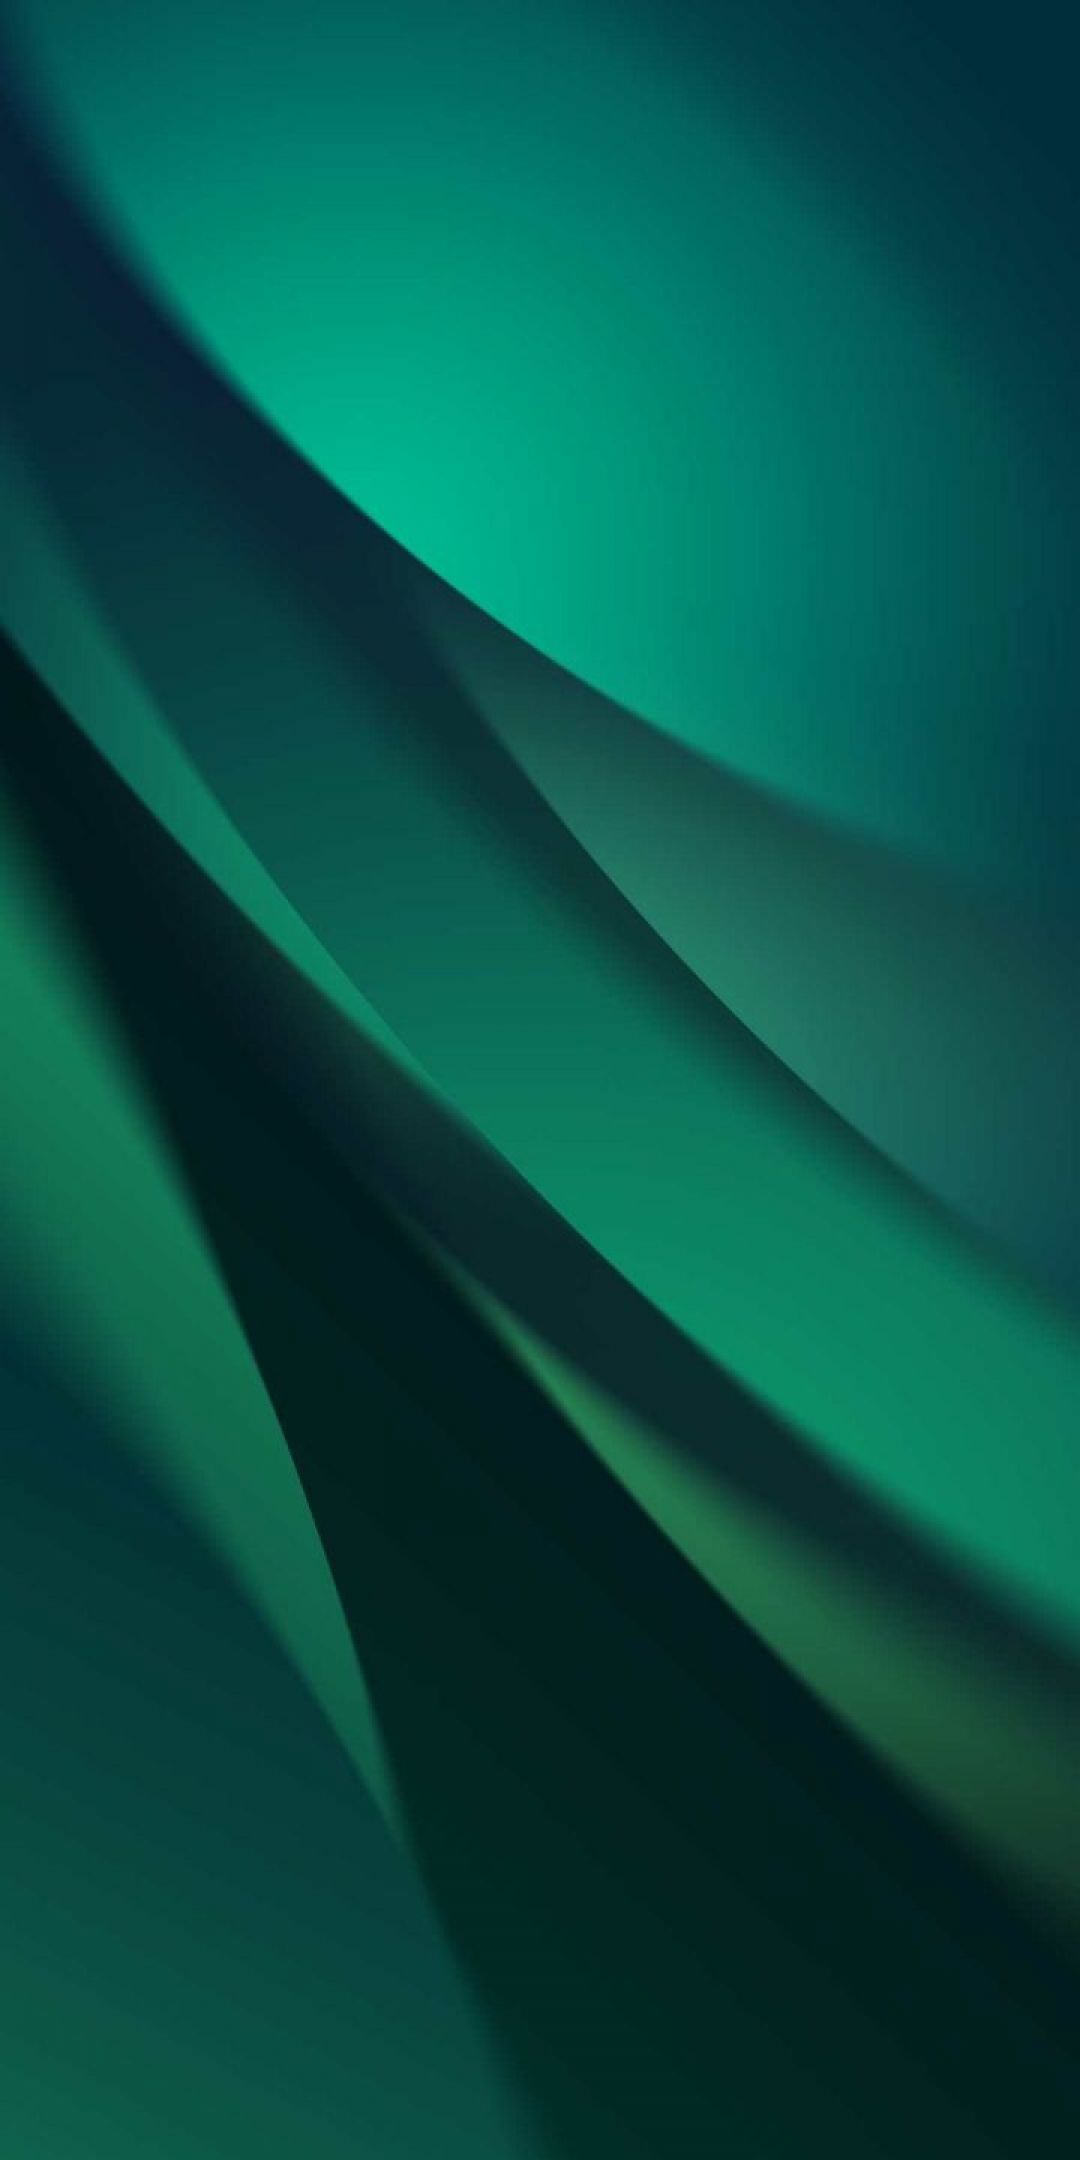 ✓[95+] Oppo K1 Mobile Stock Wallpaper 2 - 720 x 1440 Preview - Android /  iPhone HD Wallpaper Background Download (png / jpg) (2023)